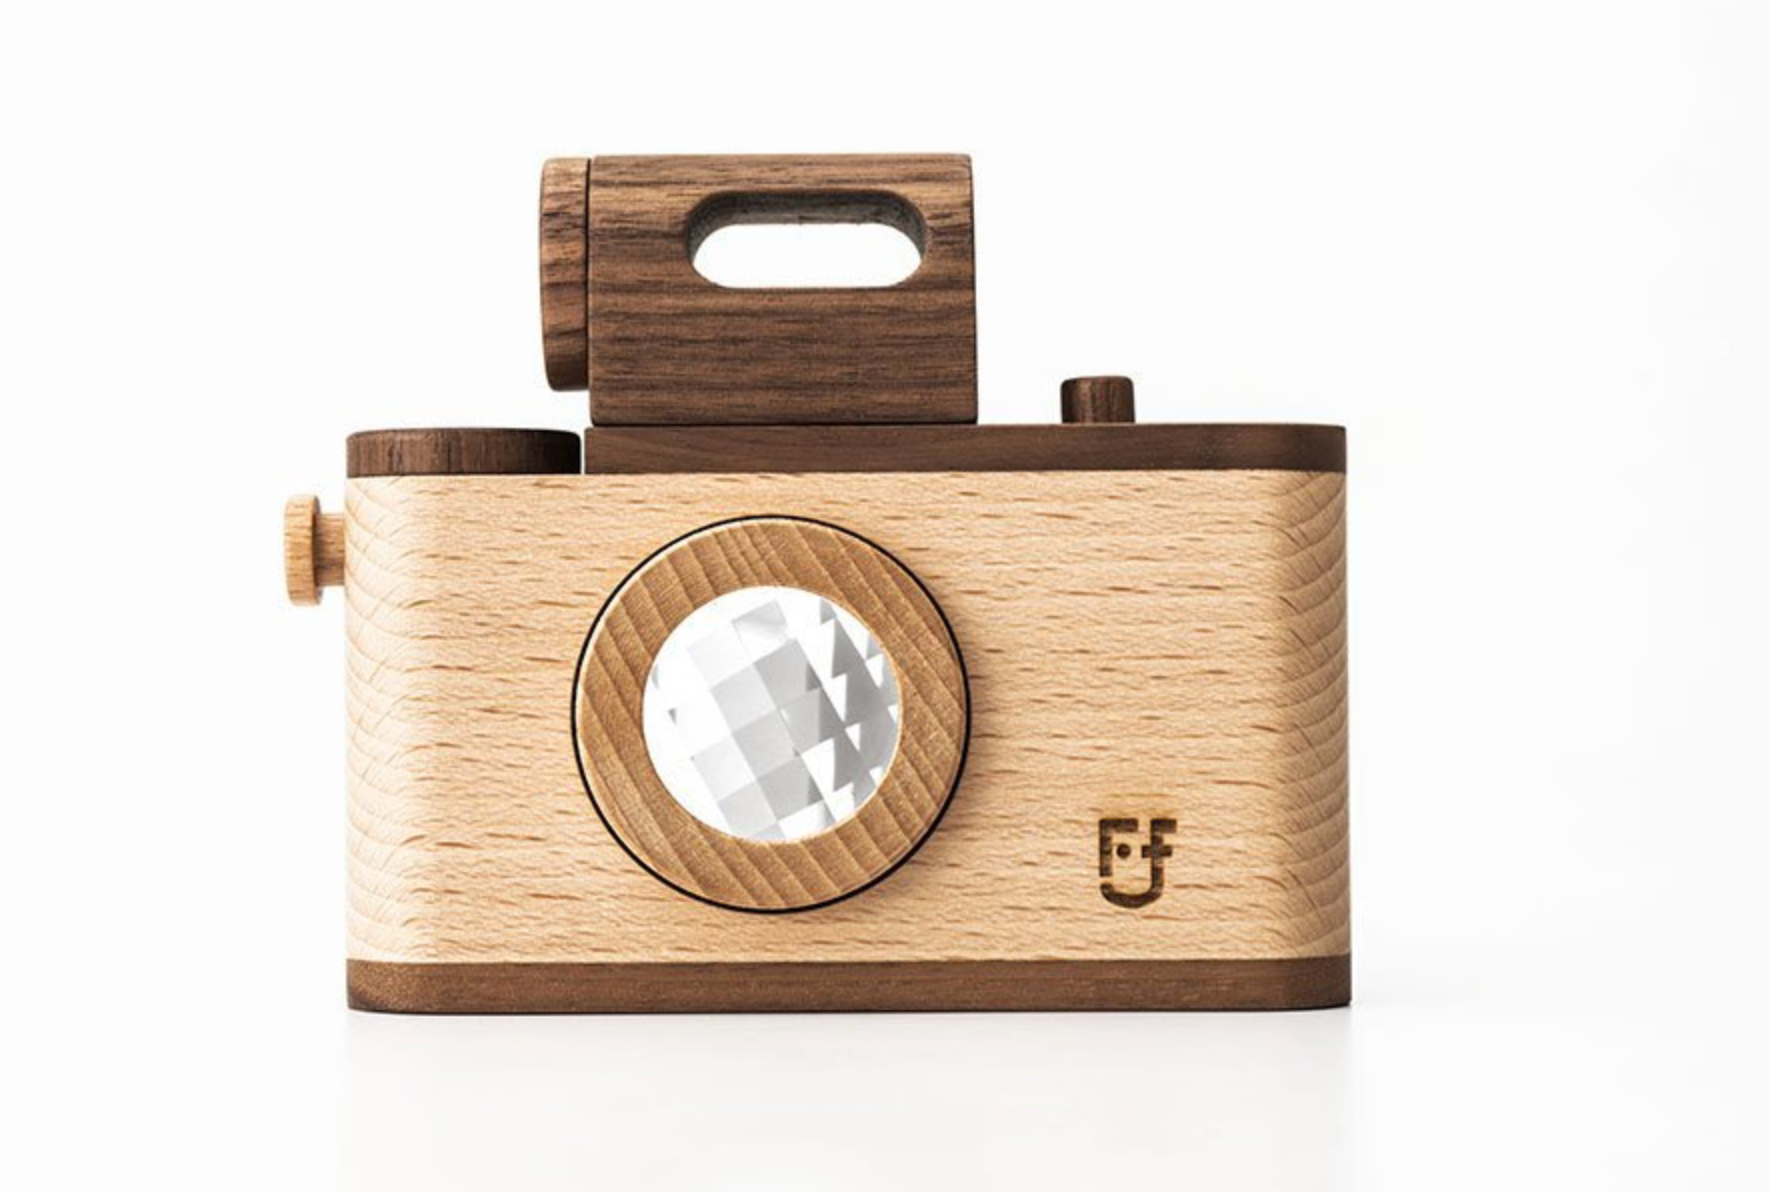 35MM vintage style wooden toy camera